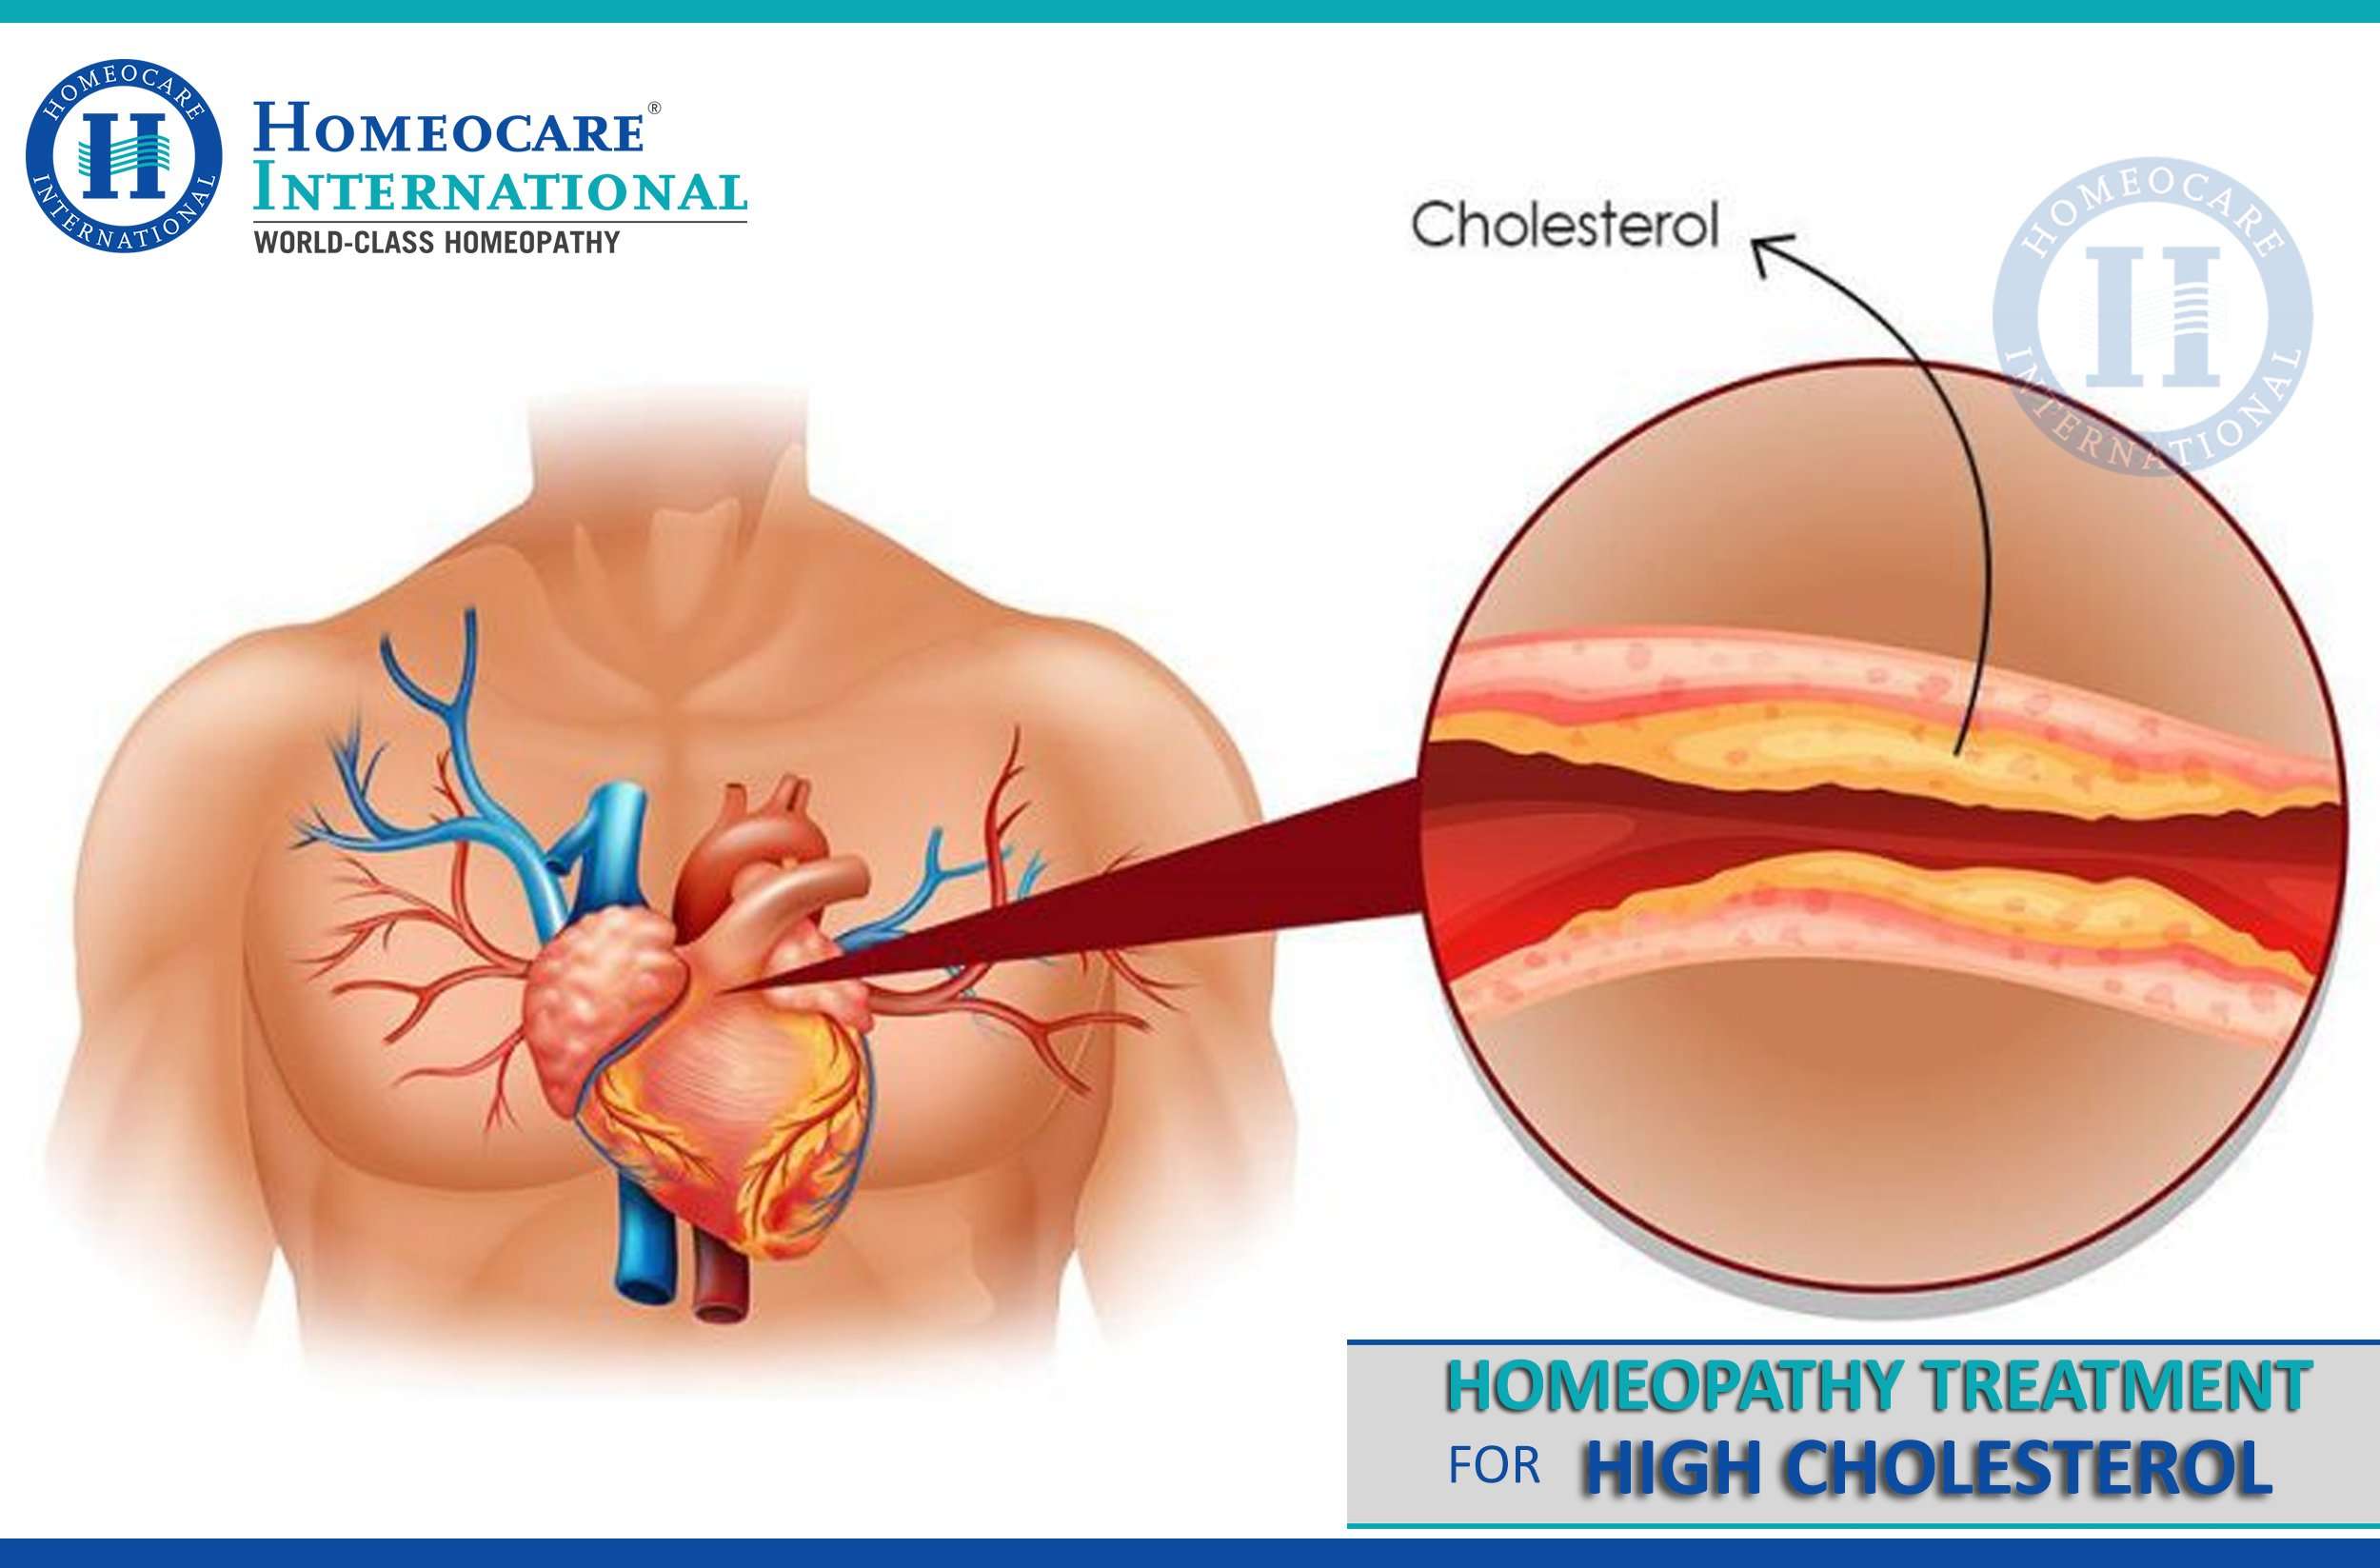 Homeopathy Treatment for High Cholesterol